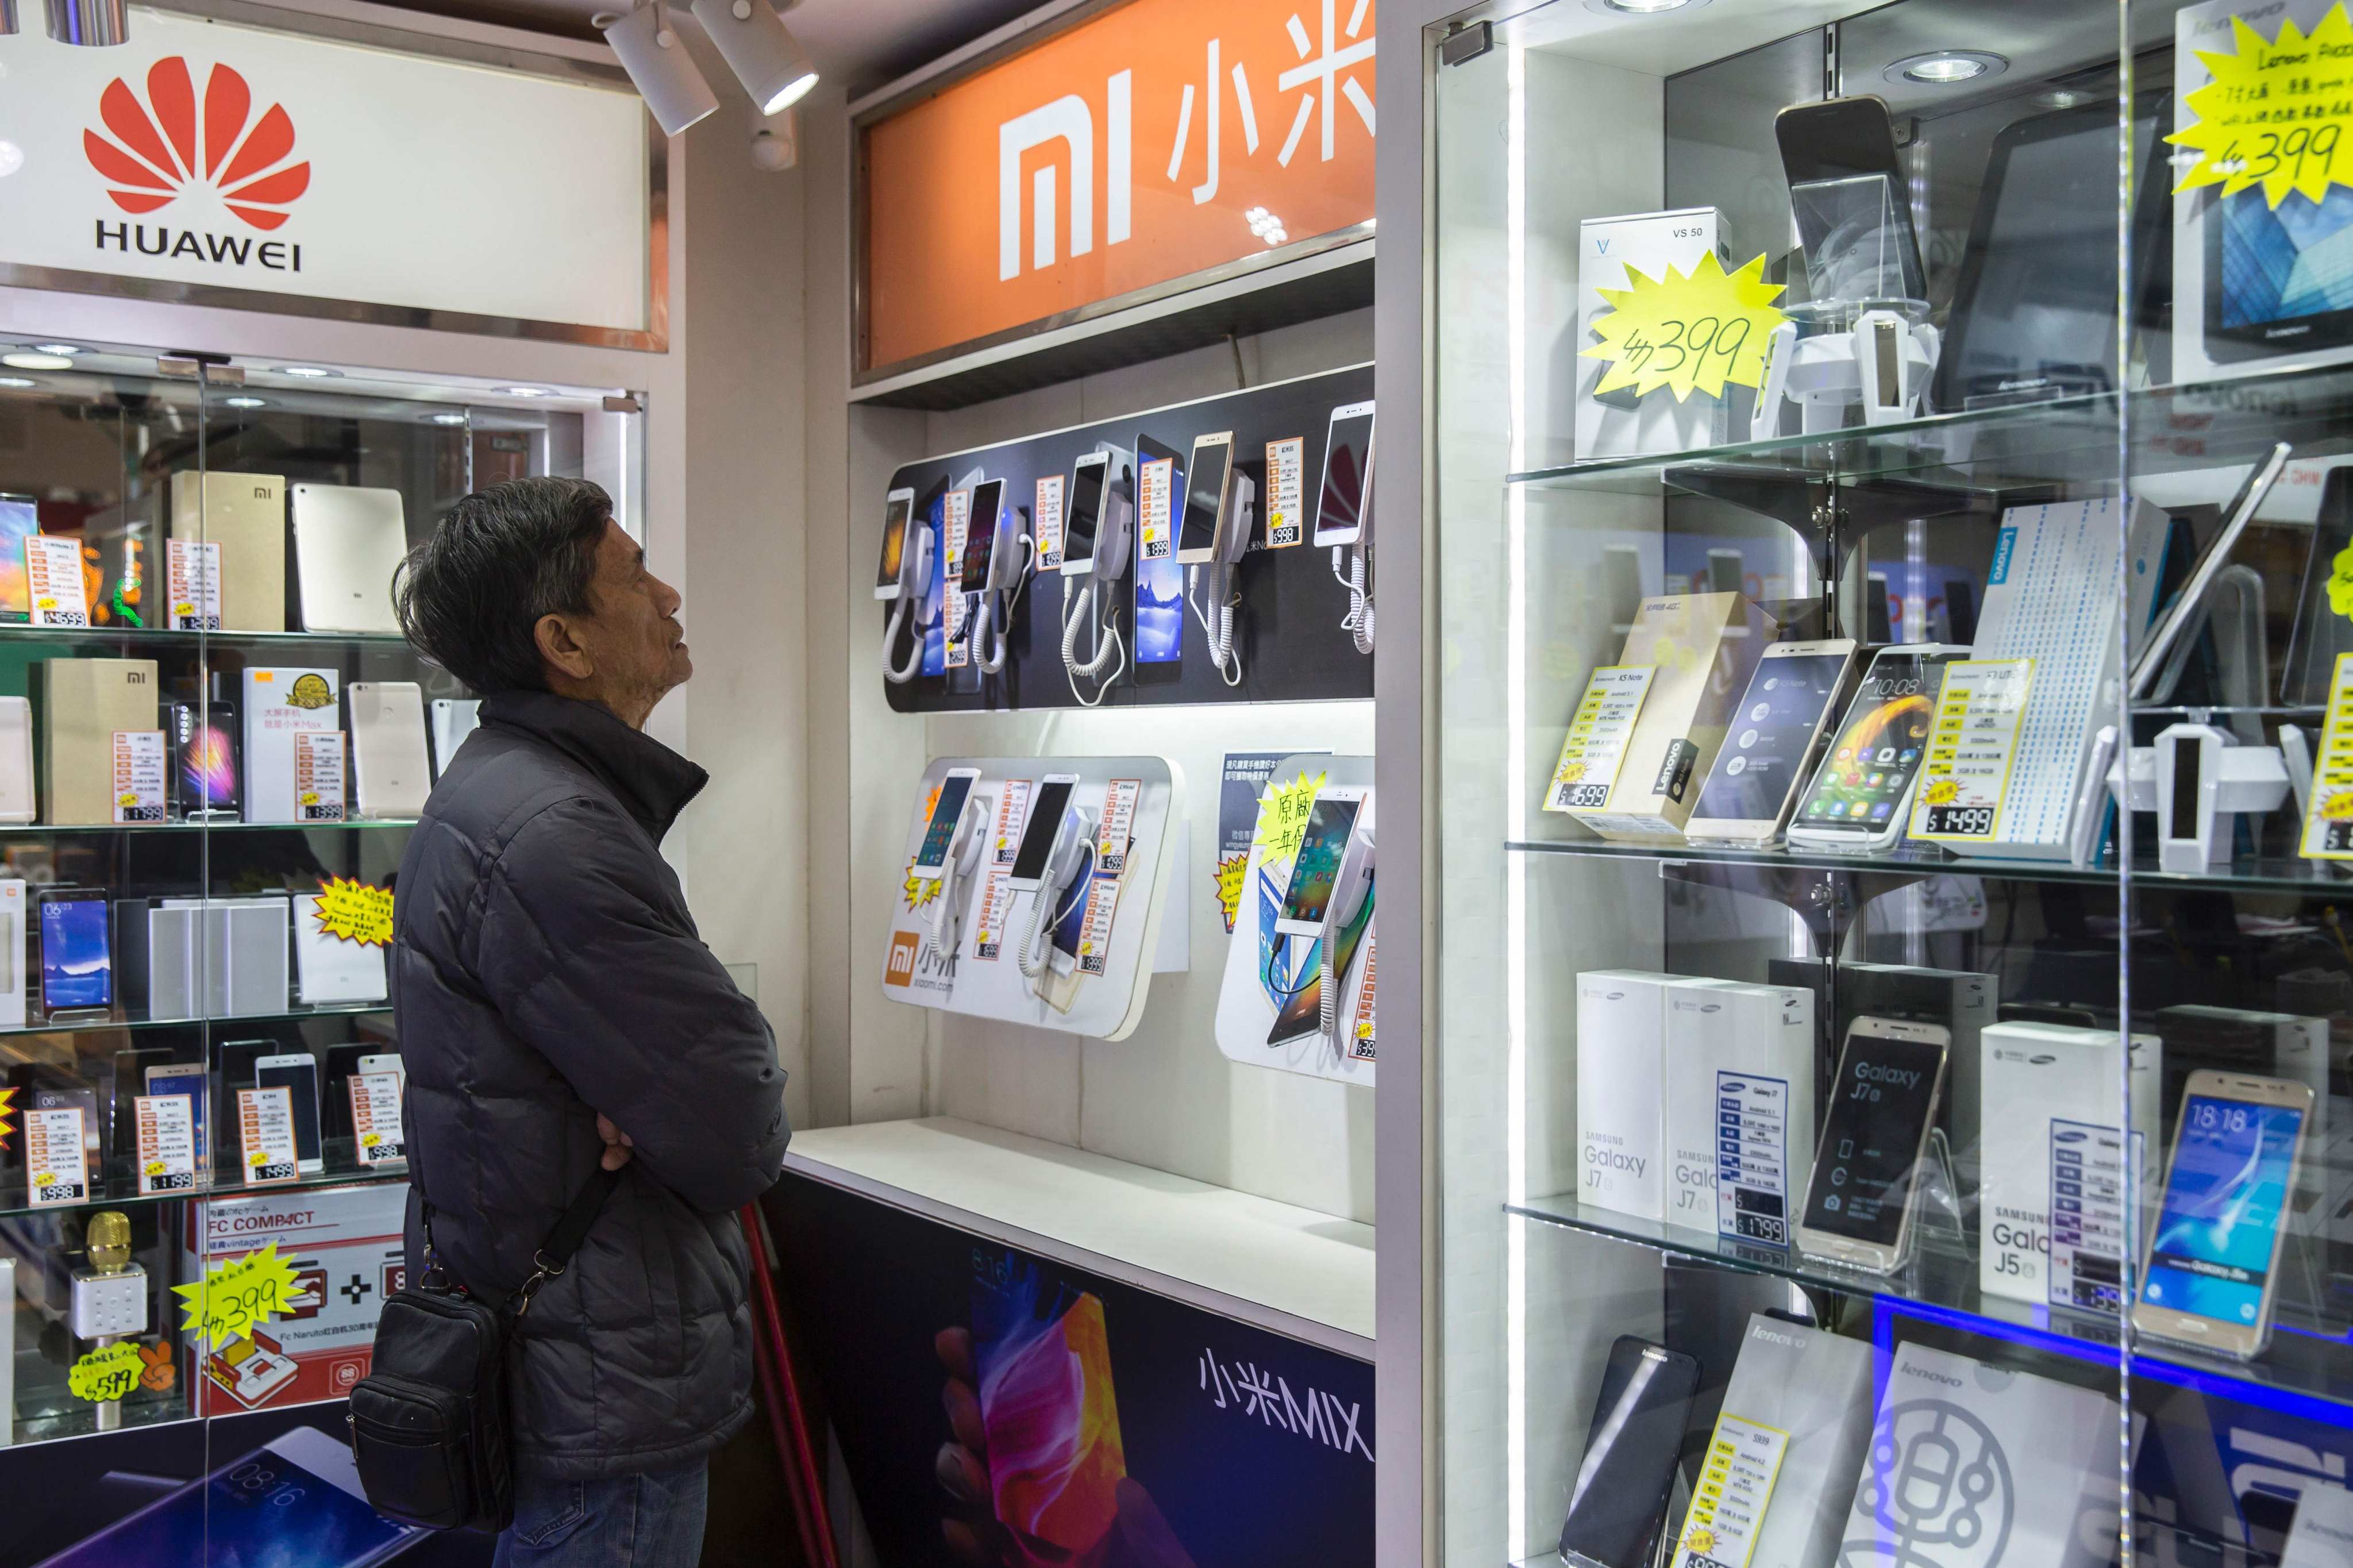 A customer browses mobile phones in a retail store in the Sham Shui Po district of Hong Kong. Electronic waste has become an increasing problem in China, which is expected to have 6 billion discarded mobile phones by 2025. Photo: AFP